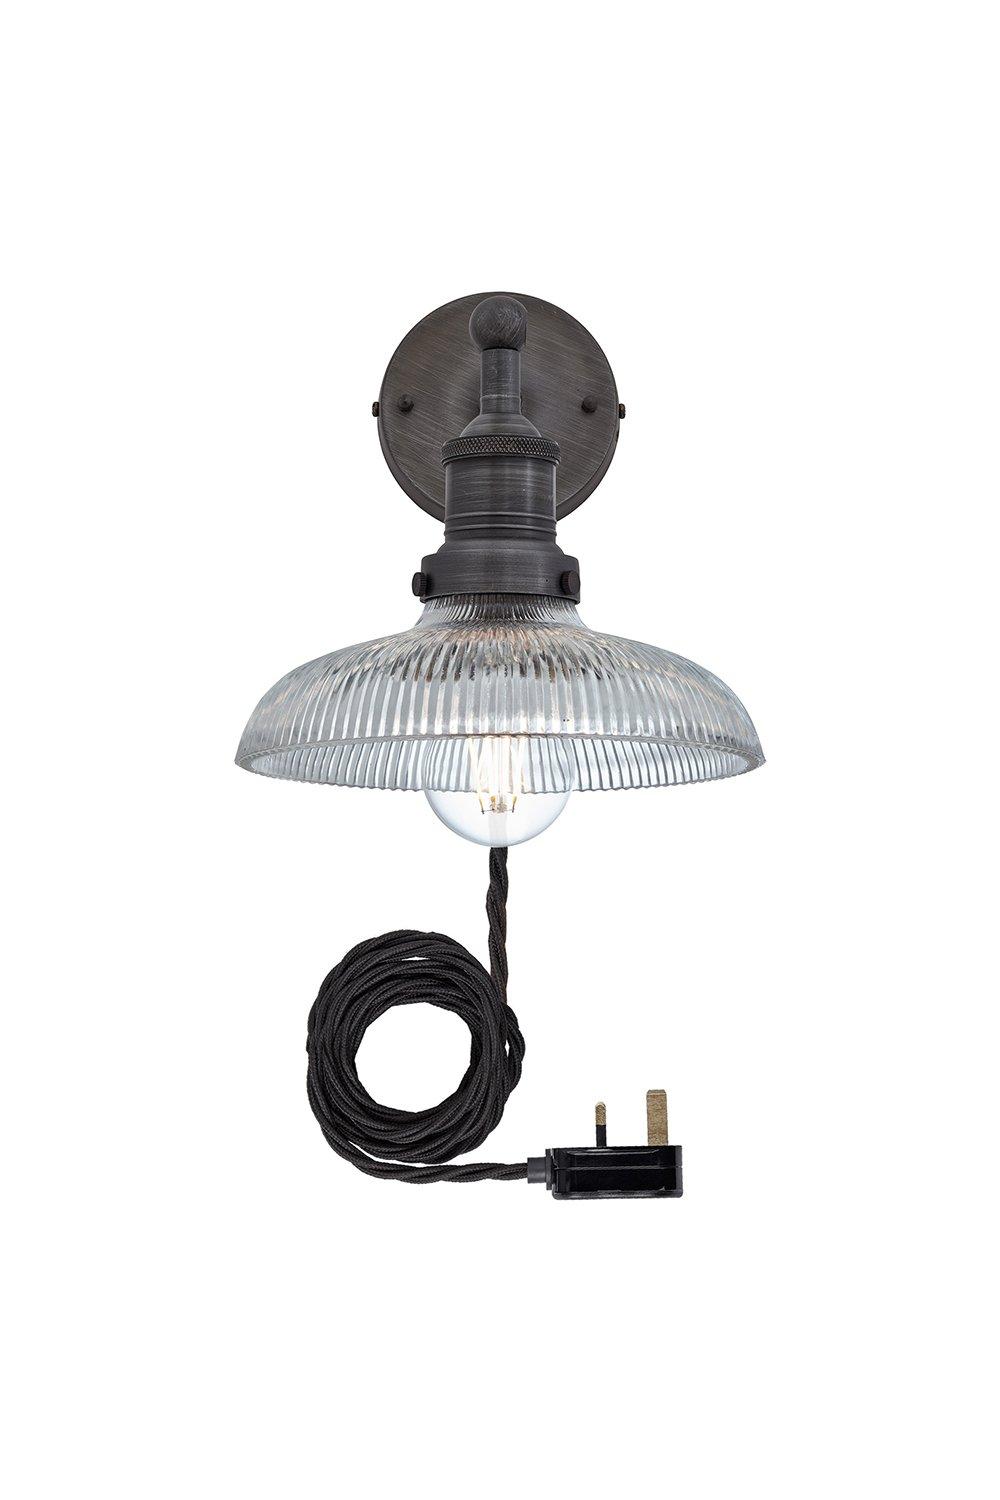 Brooklyn Glass Dome Wall Light, 8 Inch, Pewter Holder With Plug